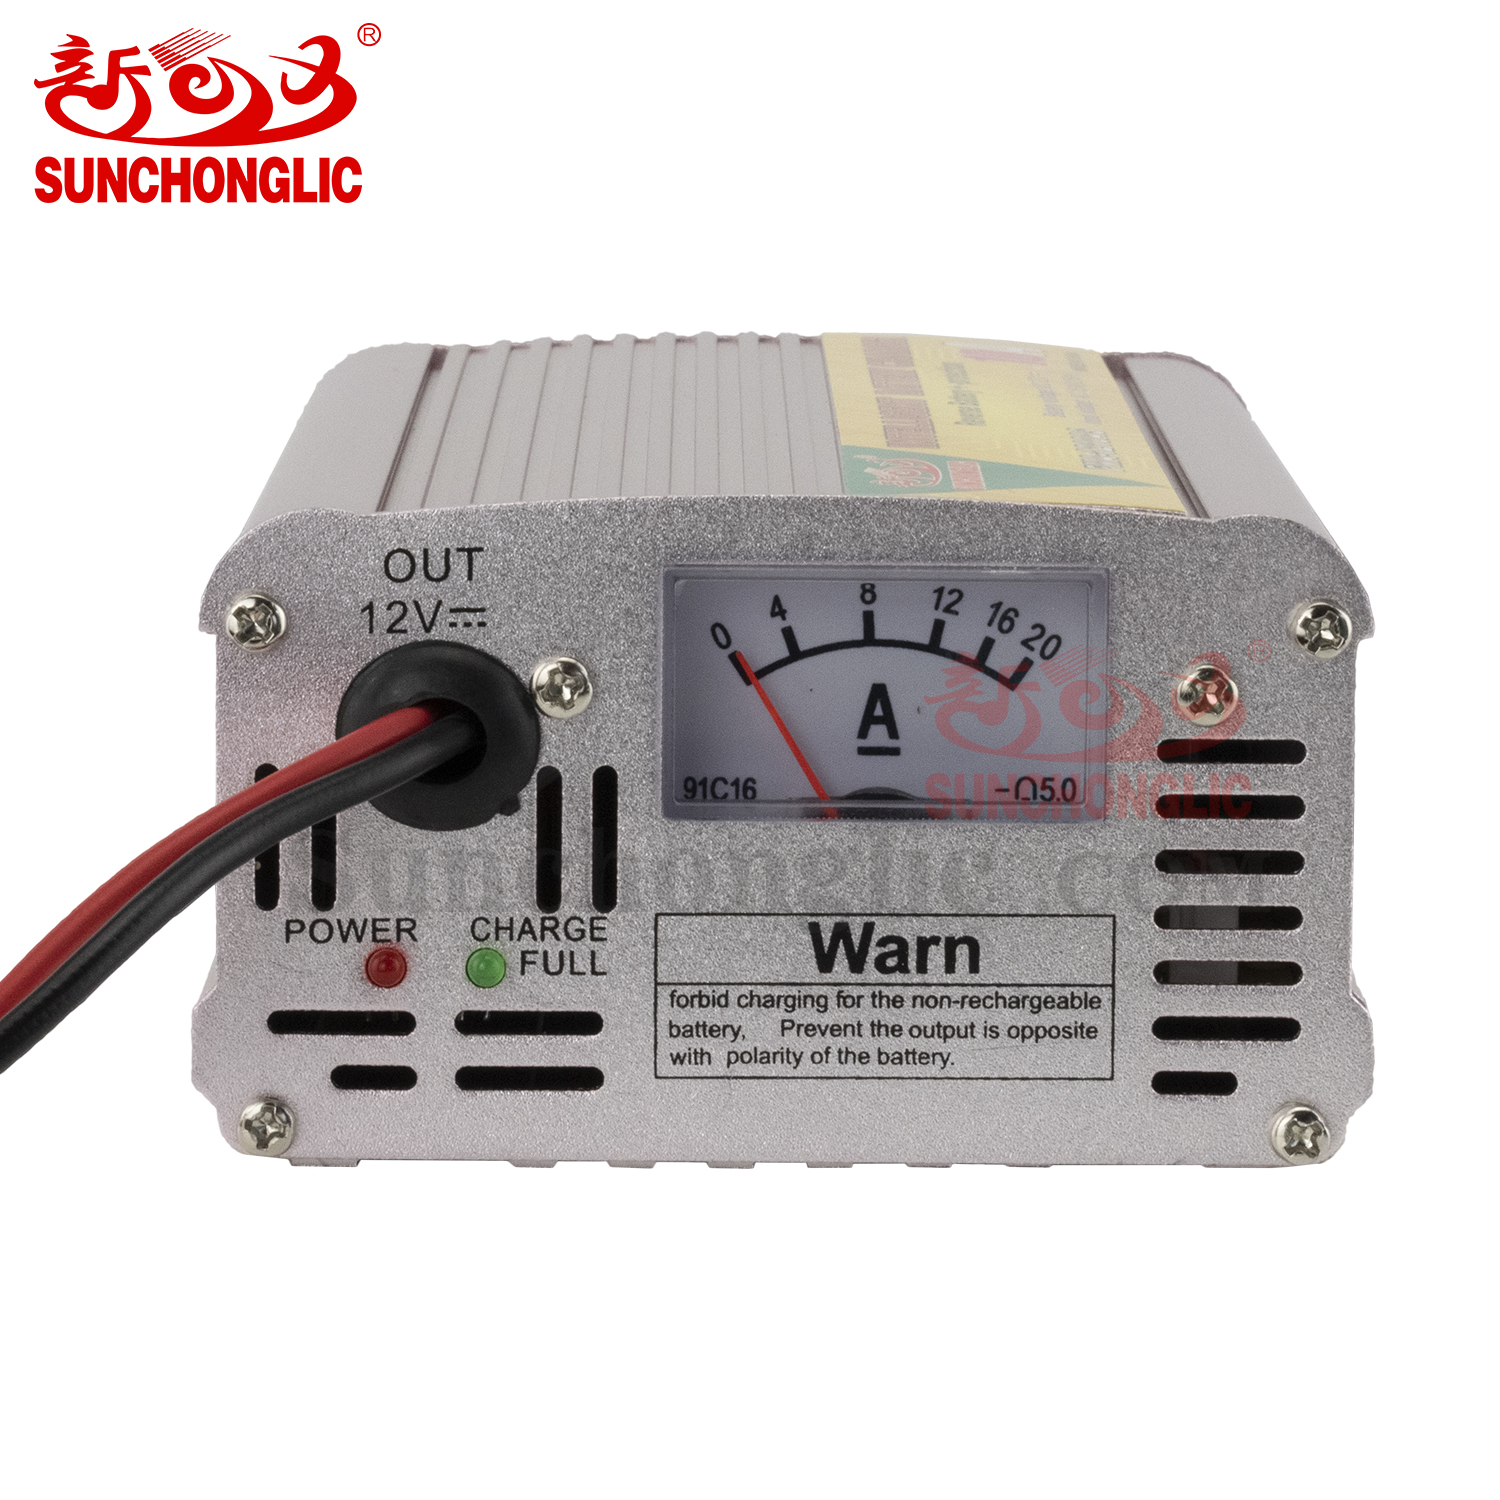 Three stage 12V 10 amp AGM lead acid battery charger